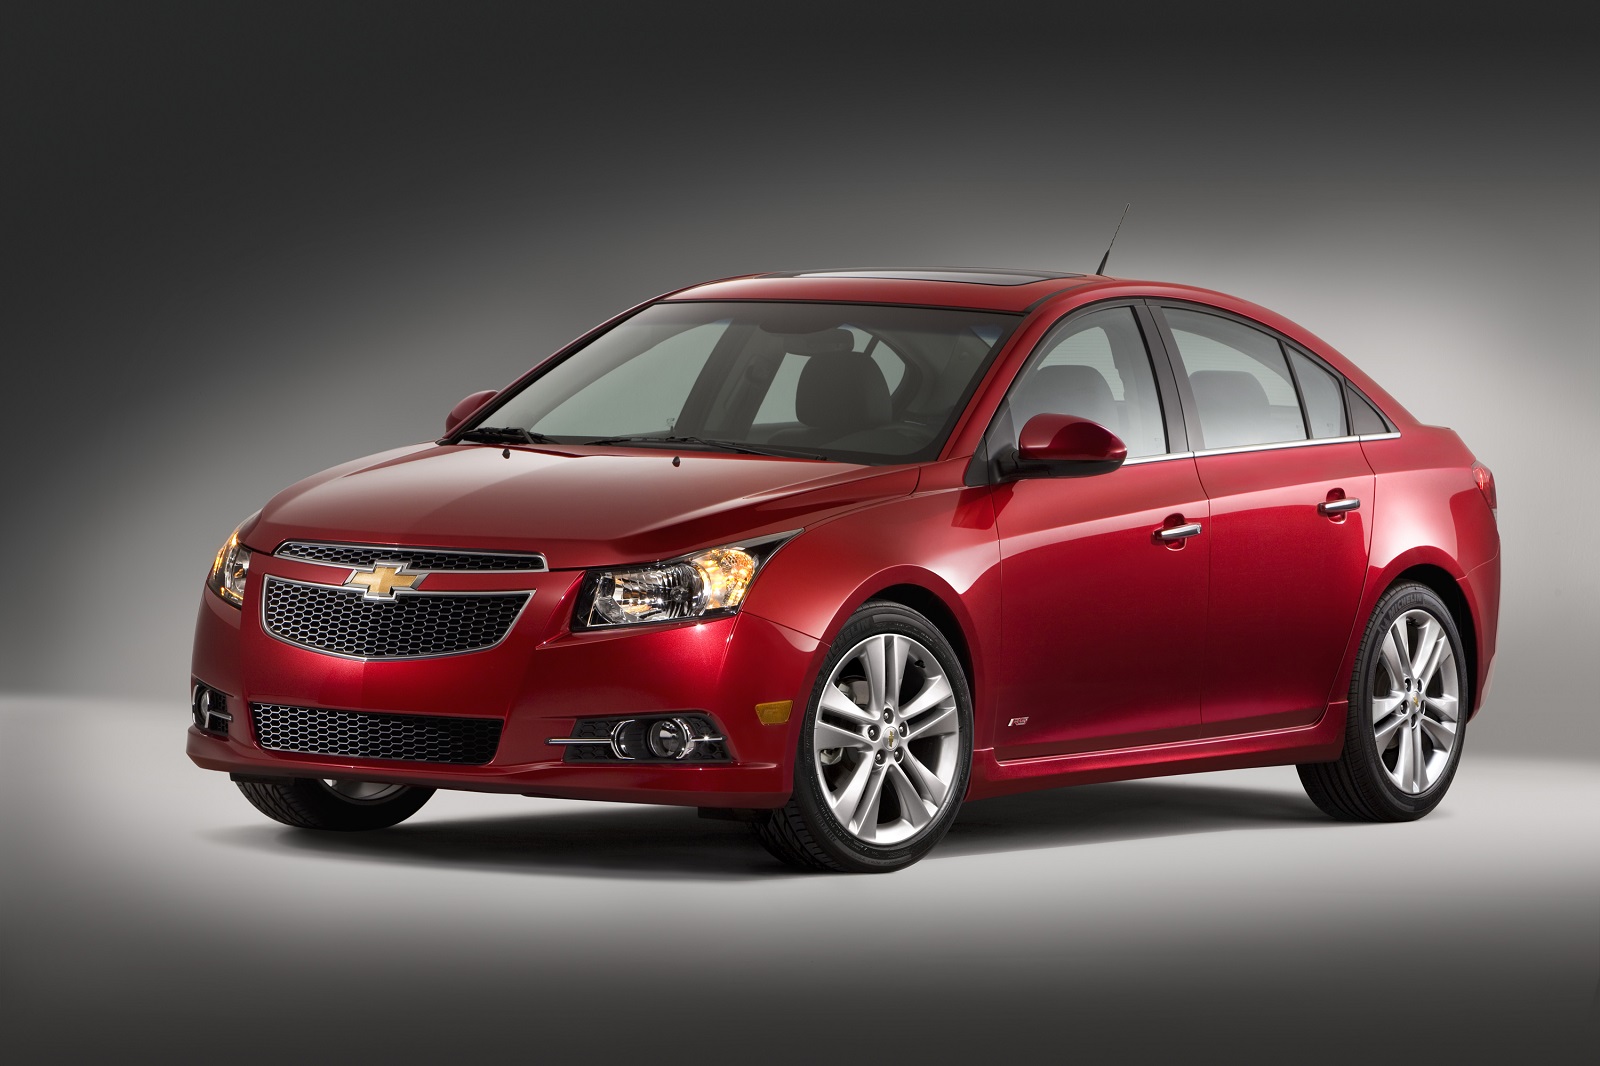 2013-2014 Chevrolet Cruze Recalled For Faulty Airbags Made By Takata